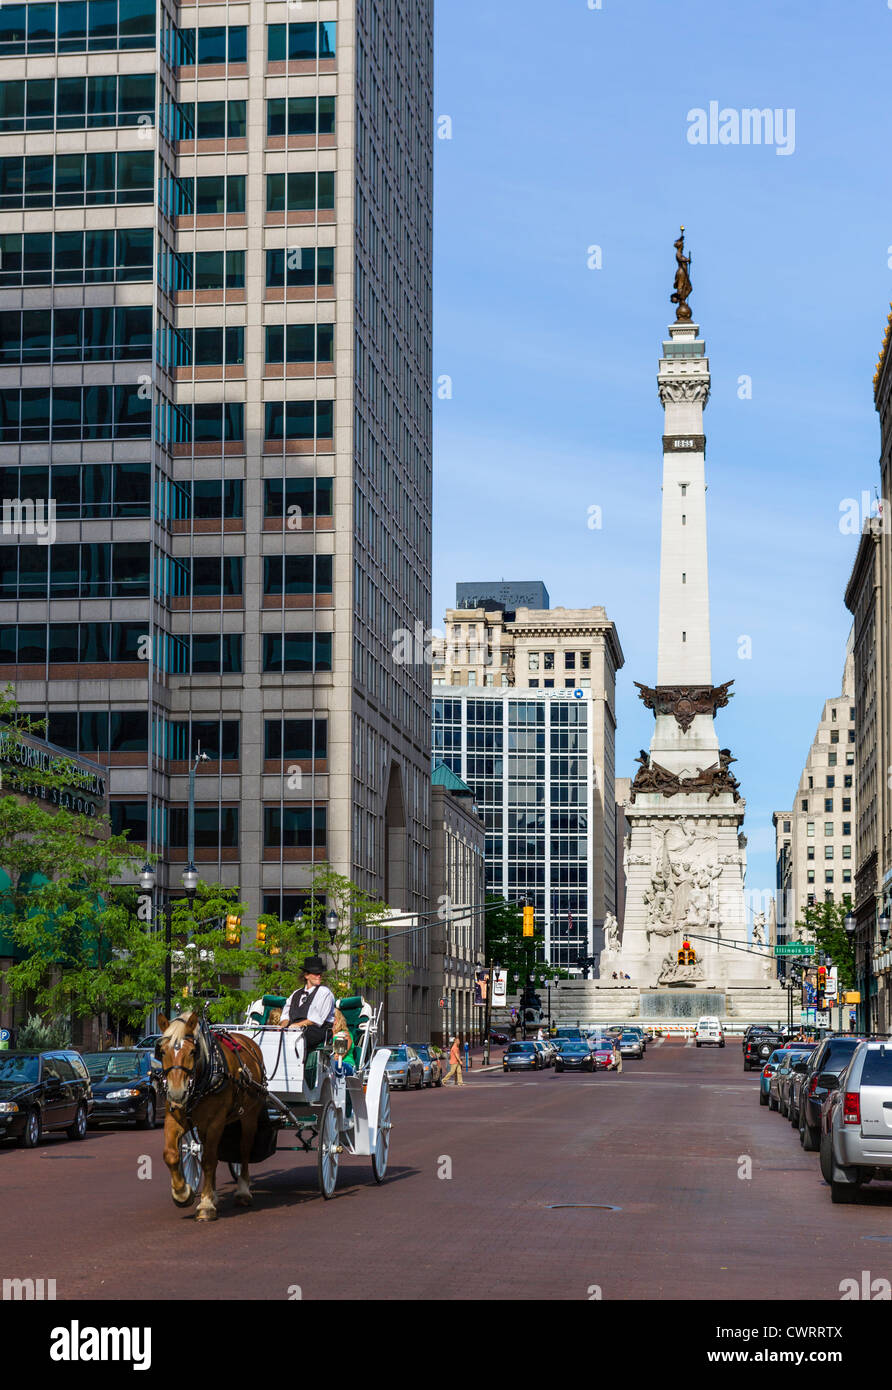 Horsedrawn carriage on W Market Street with Soldiers & Sailors Monument in Monument Circle behind, Indianapolis, Indiana, USA Stock Photo